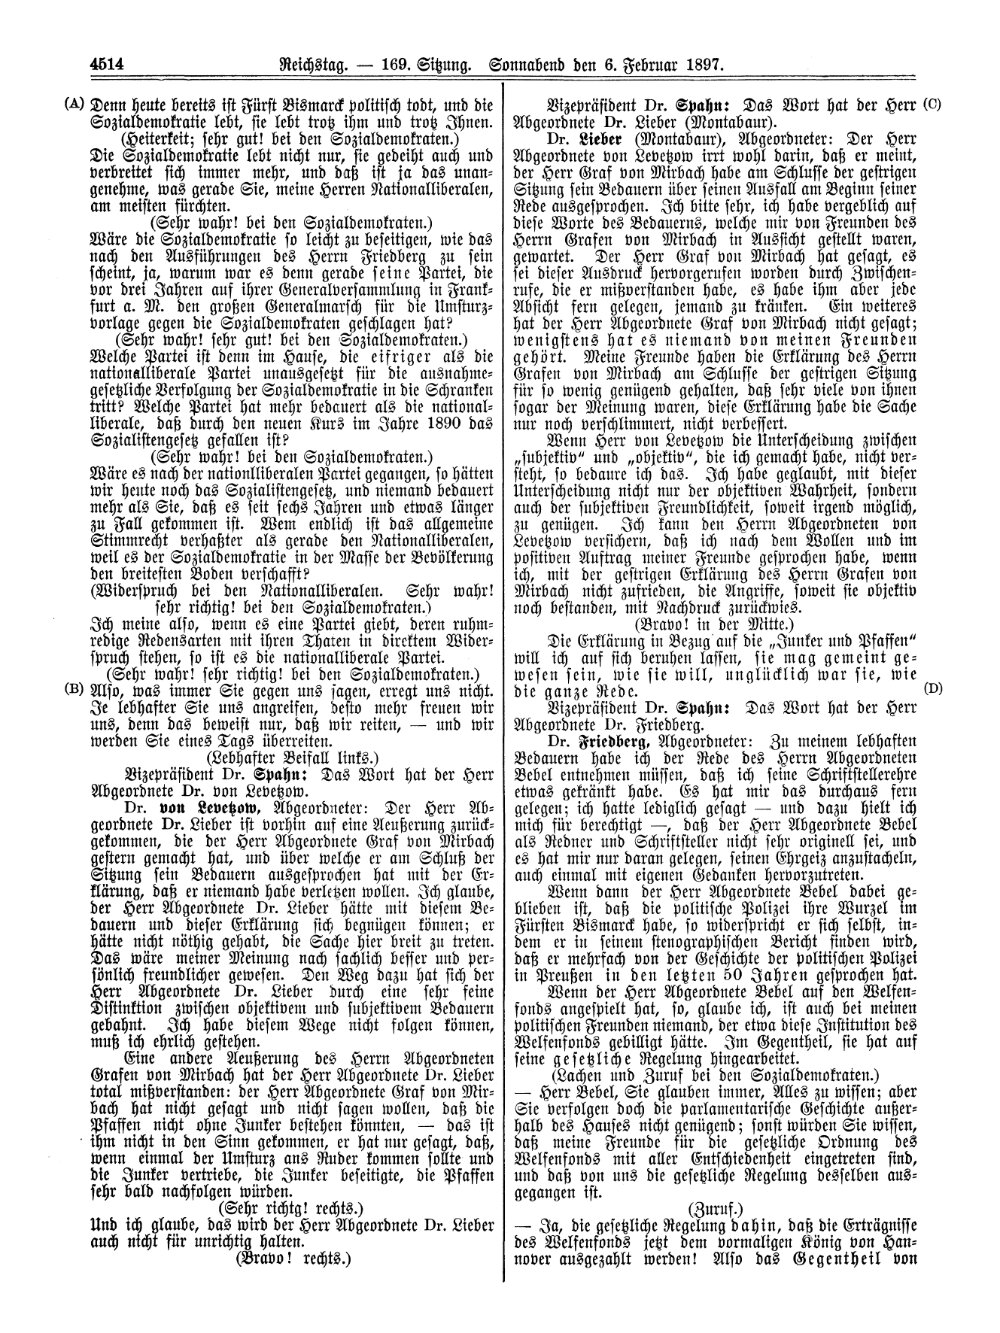 Scan of page 4514